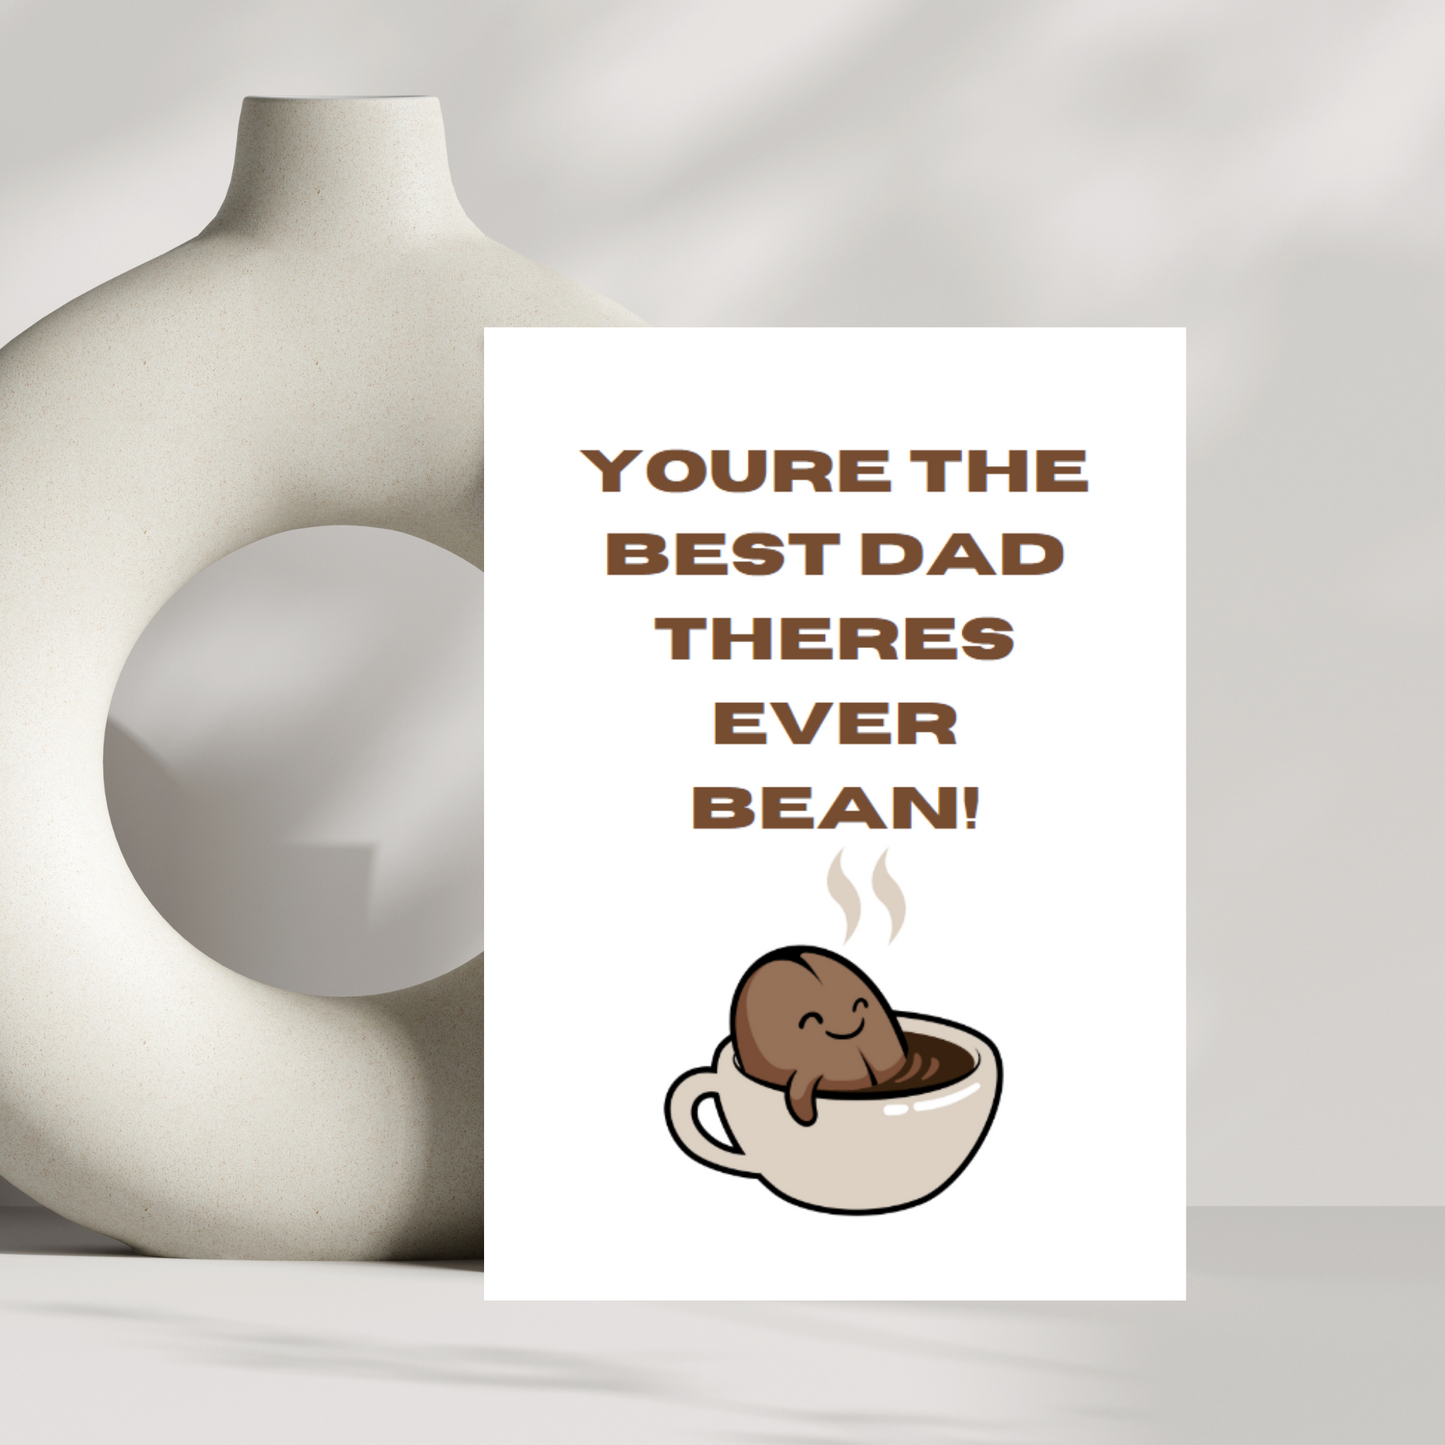 Youre the best dad theres ever bean! - coffee bean fathers day card